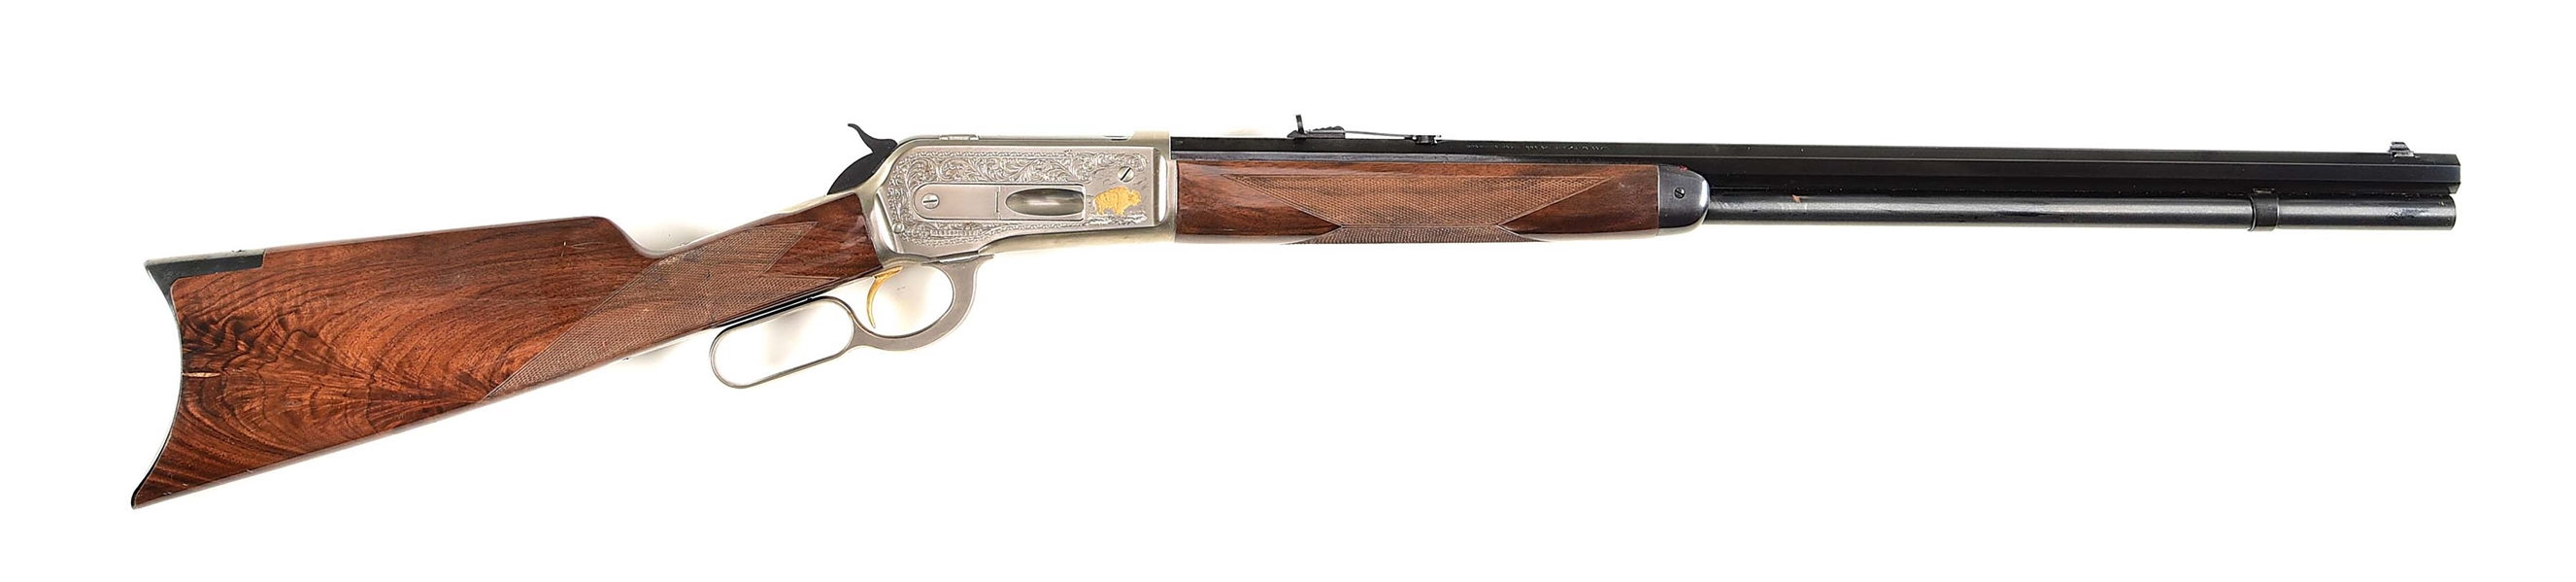 (M) T. MORI ENGRAVED BROWNING MODEL 1886 (1 OF 3000) HIGH GRADE LEVER ACTION RIFLE.